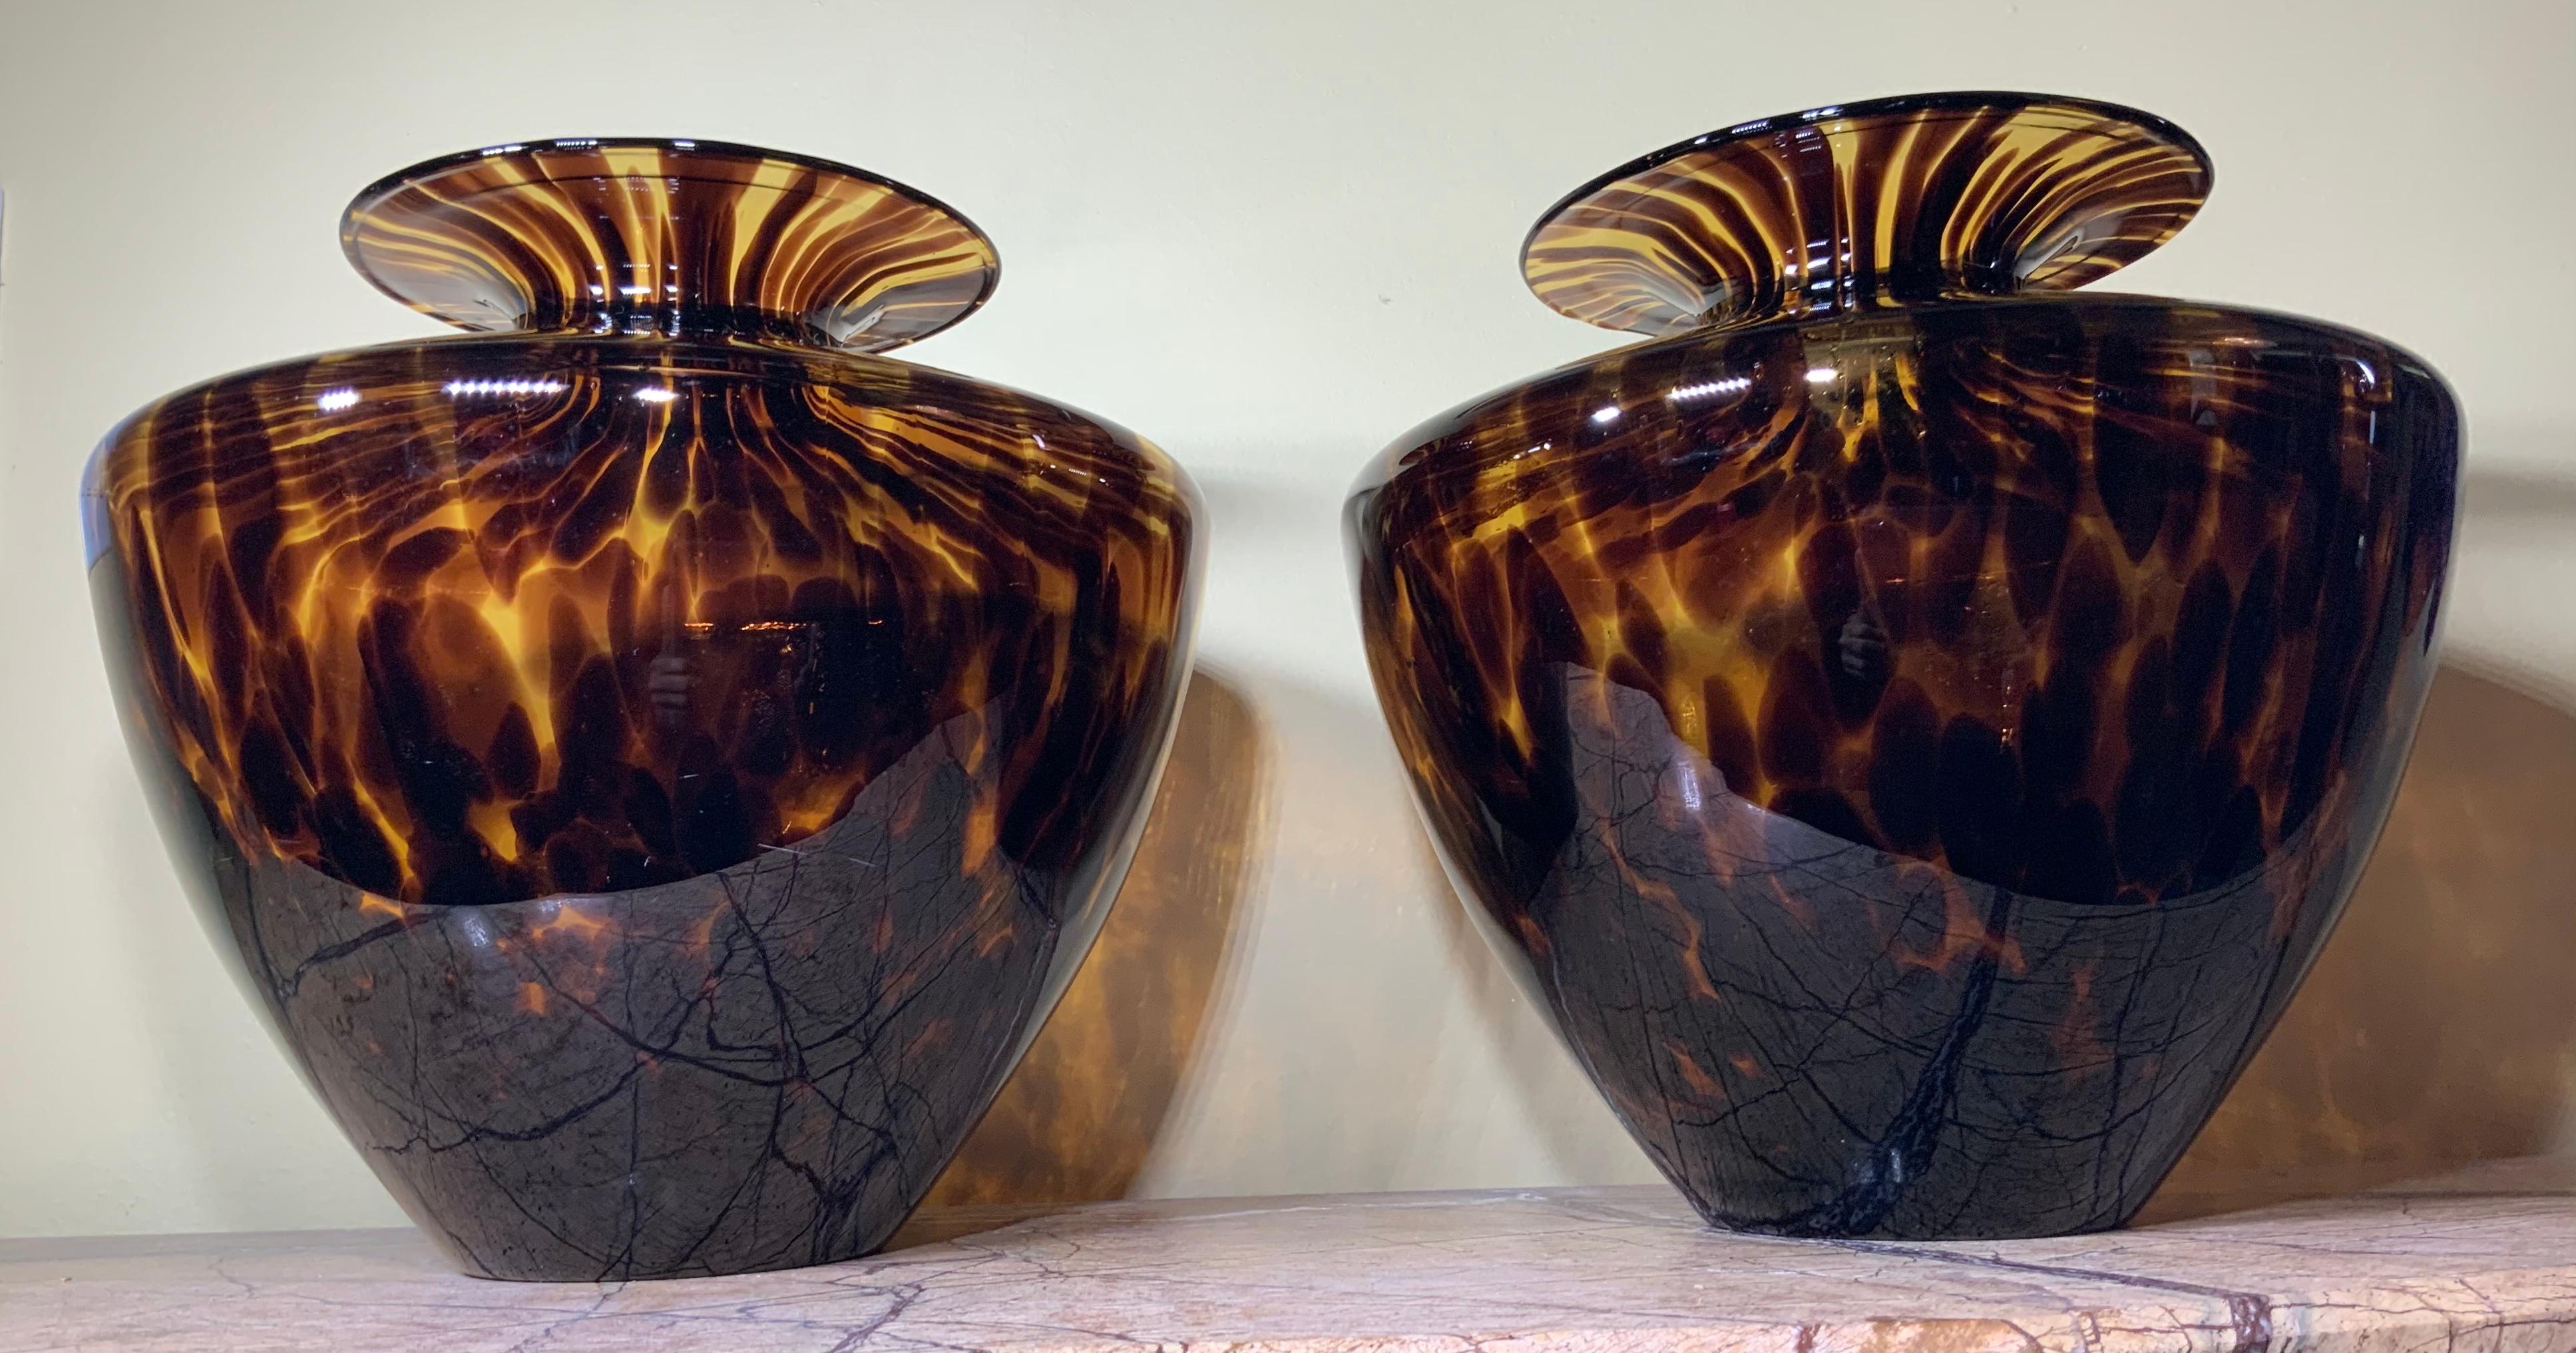 Mid-Century Modern faux tortoiseshell style blown glass vases, The Tartaruga (tortoise) pattern has beautiful deep Topaz and Amber coloring. Great object of art glass for display.

 